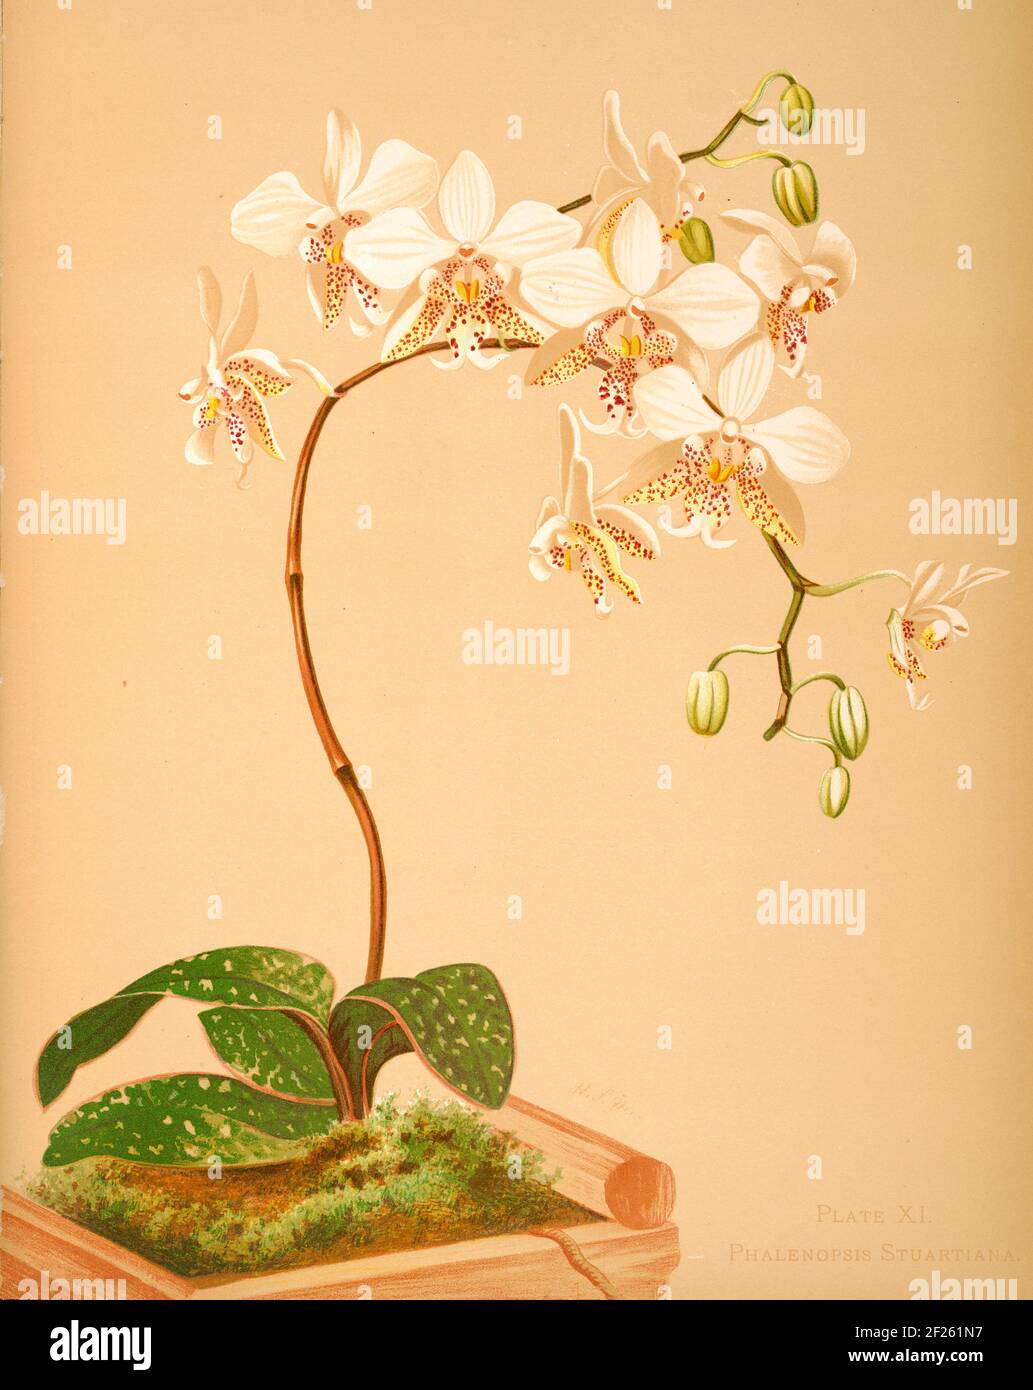 Harriet Stewart Miner's botanical vintage illustration from Orchids - The Royal Family of Plants from 1885 - Phalenopsis stuartiana Stock Photo